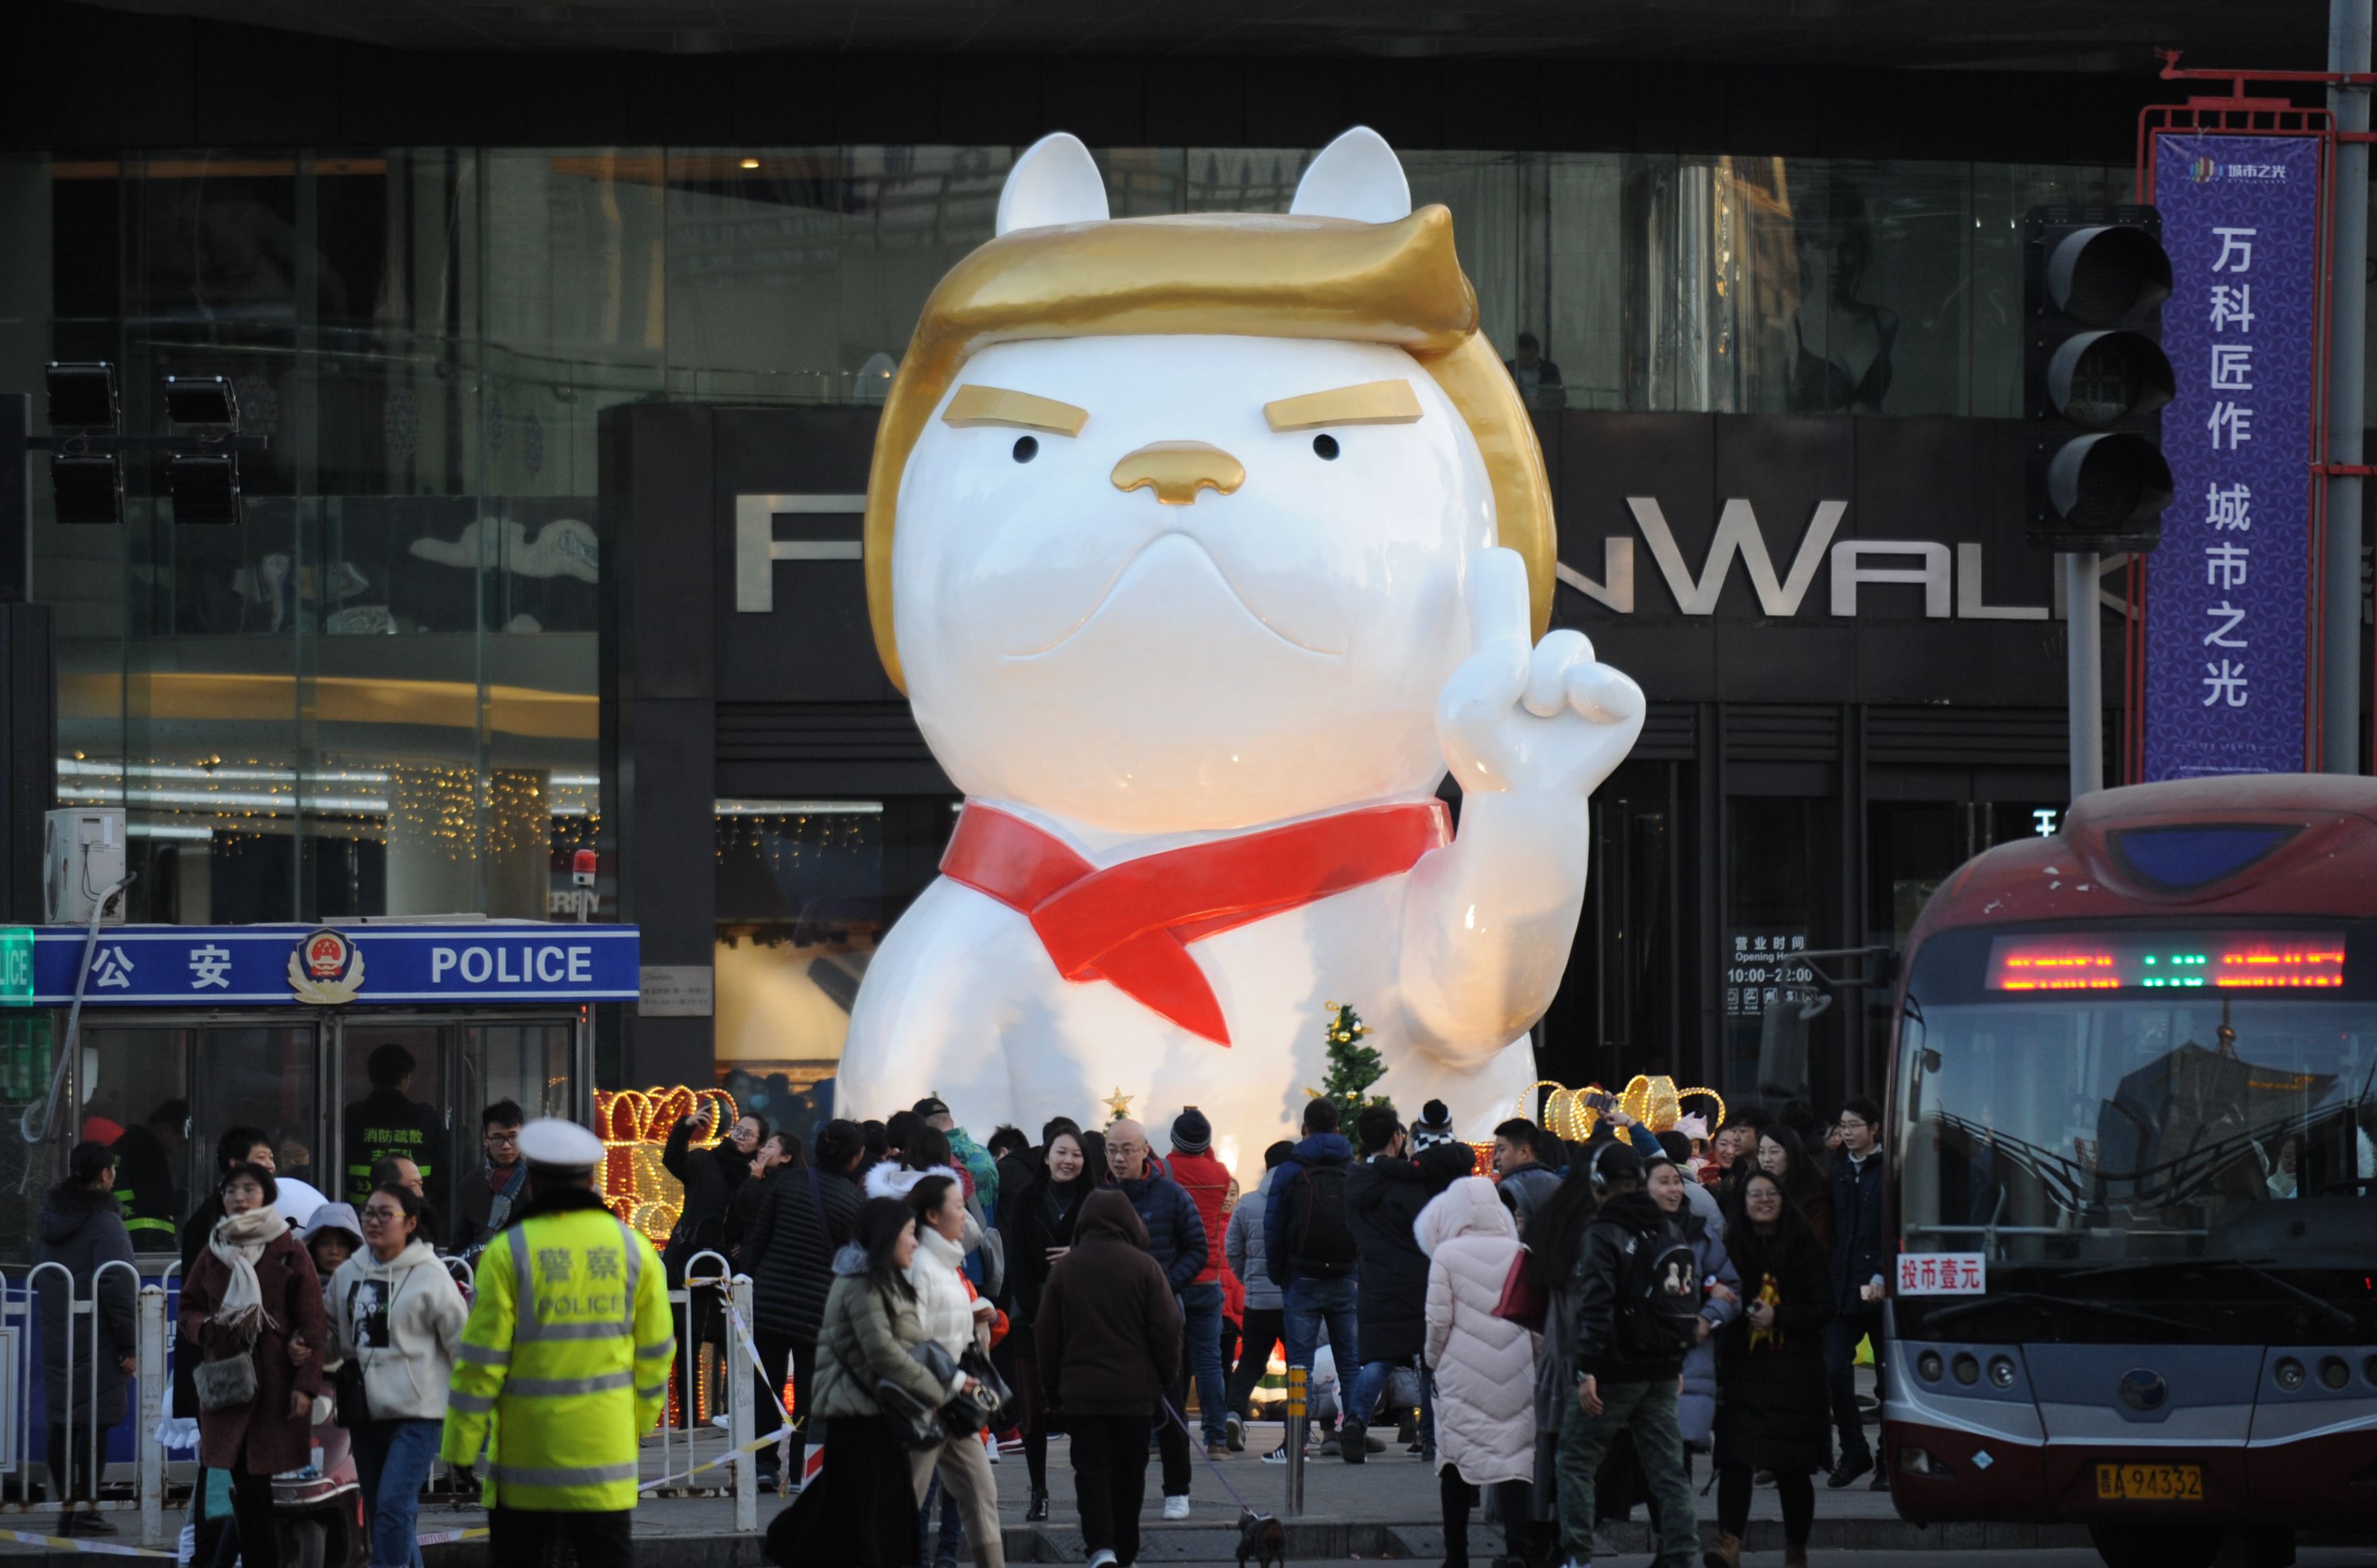 A dog sculpture resembling President Donald Trump outside a shopping mall in Taiyuan, China on on Dec. 24, 2017. (Yinming—VCG/Getty Images)